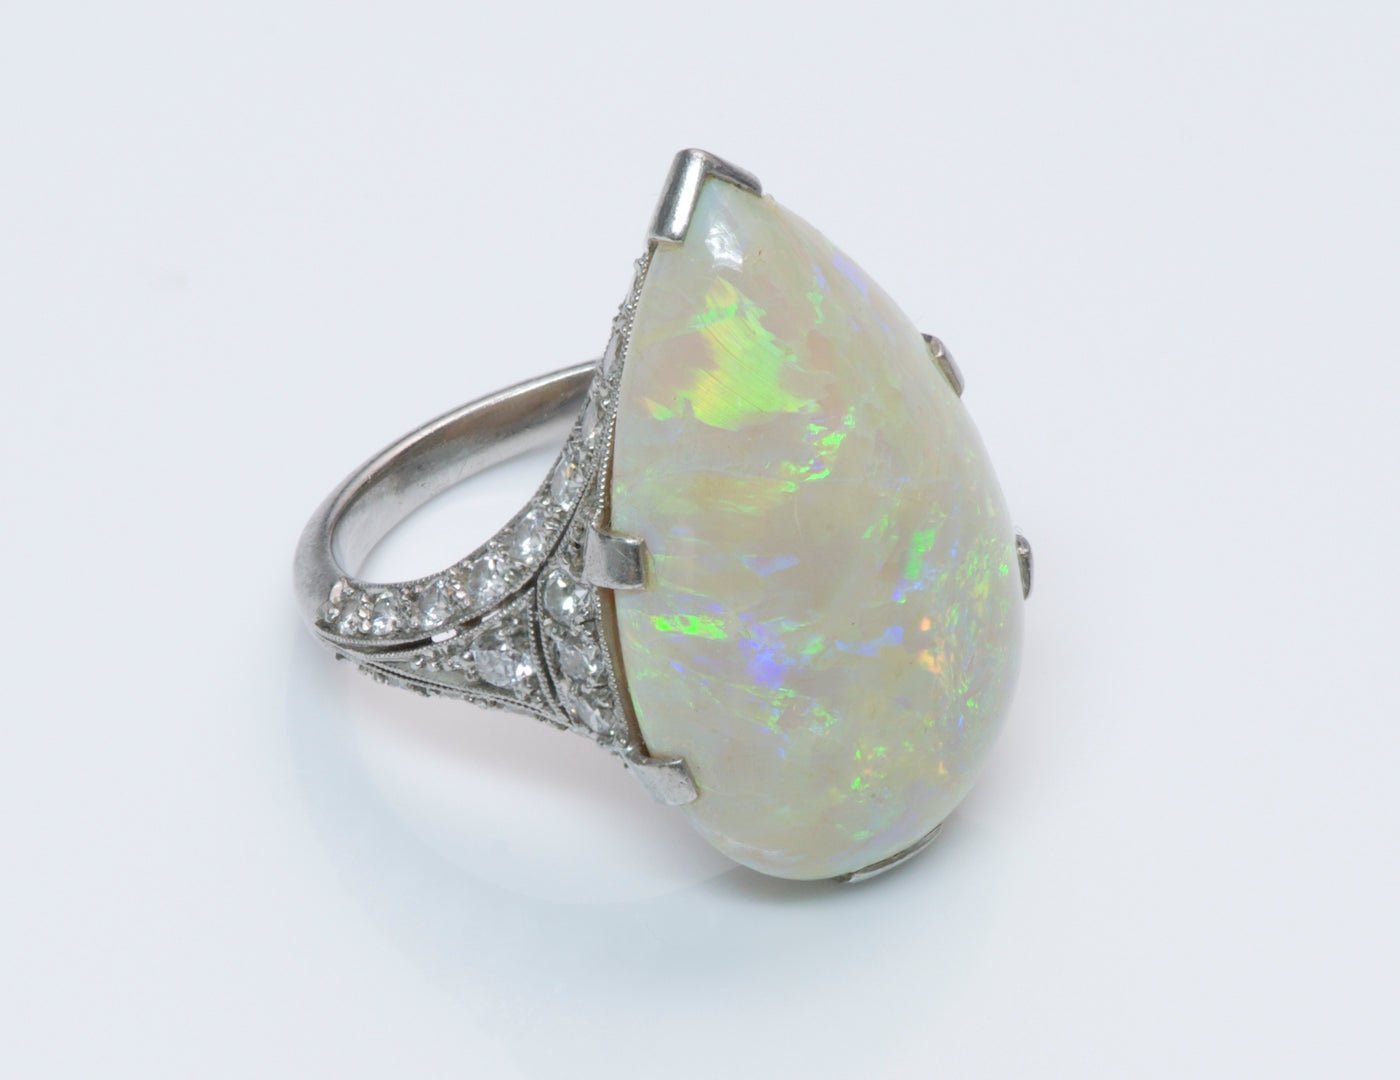 Antique Edwardian Opal and Diamond Gold Ring